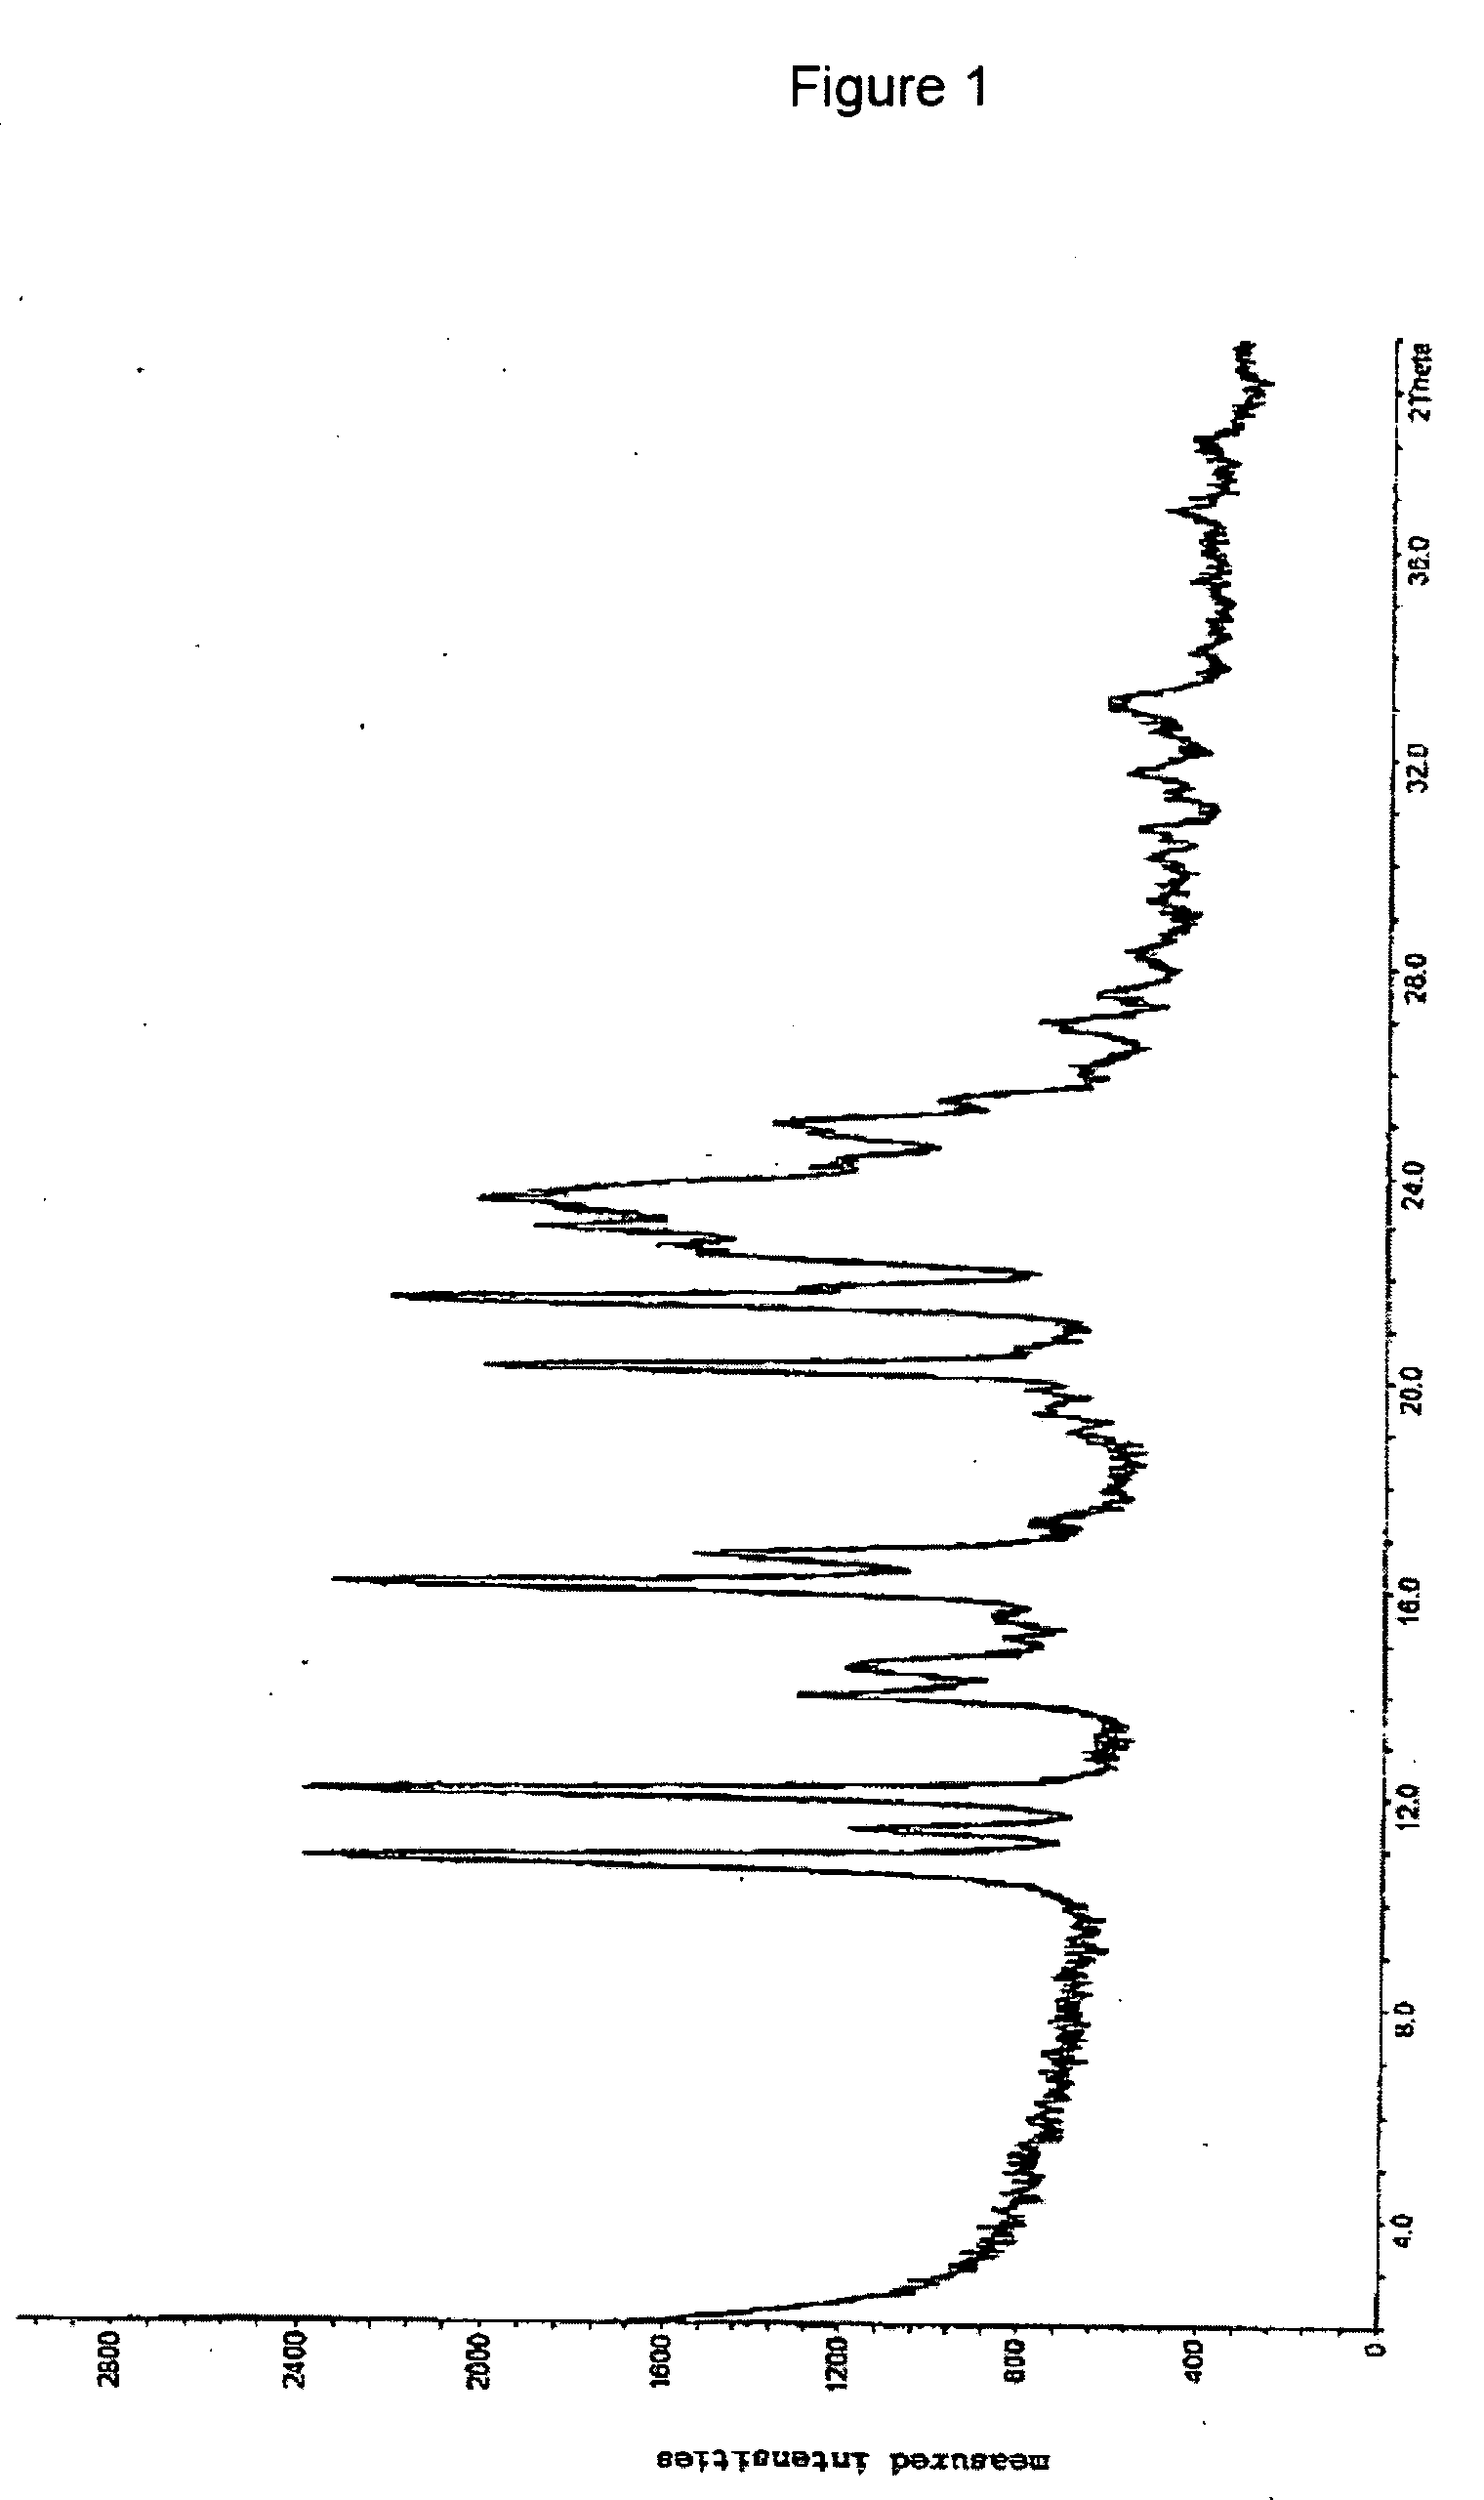 Benzenesulfonic acid salts of clopidogrel, methods for preparing same, and pharmaceutical formulations thereof